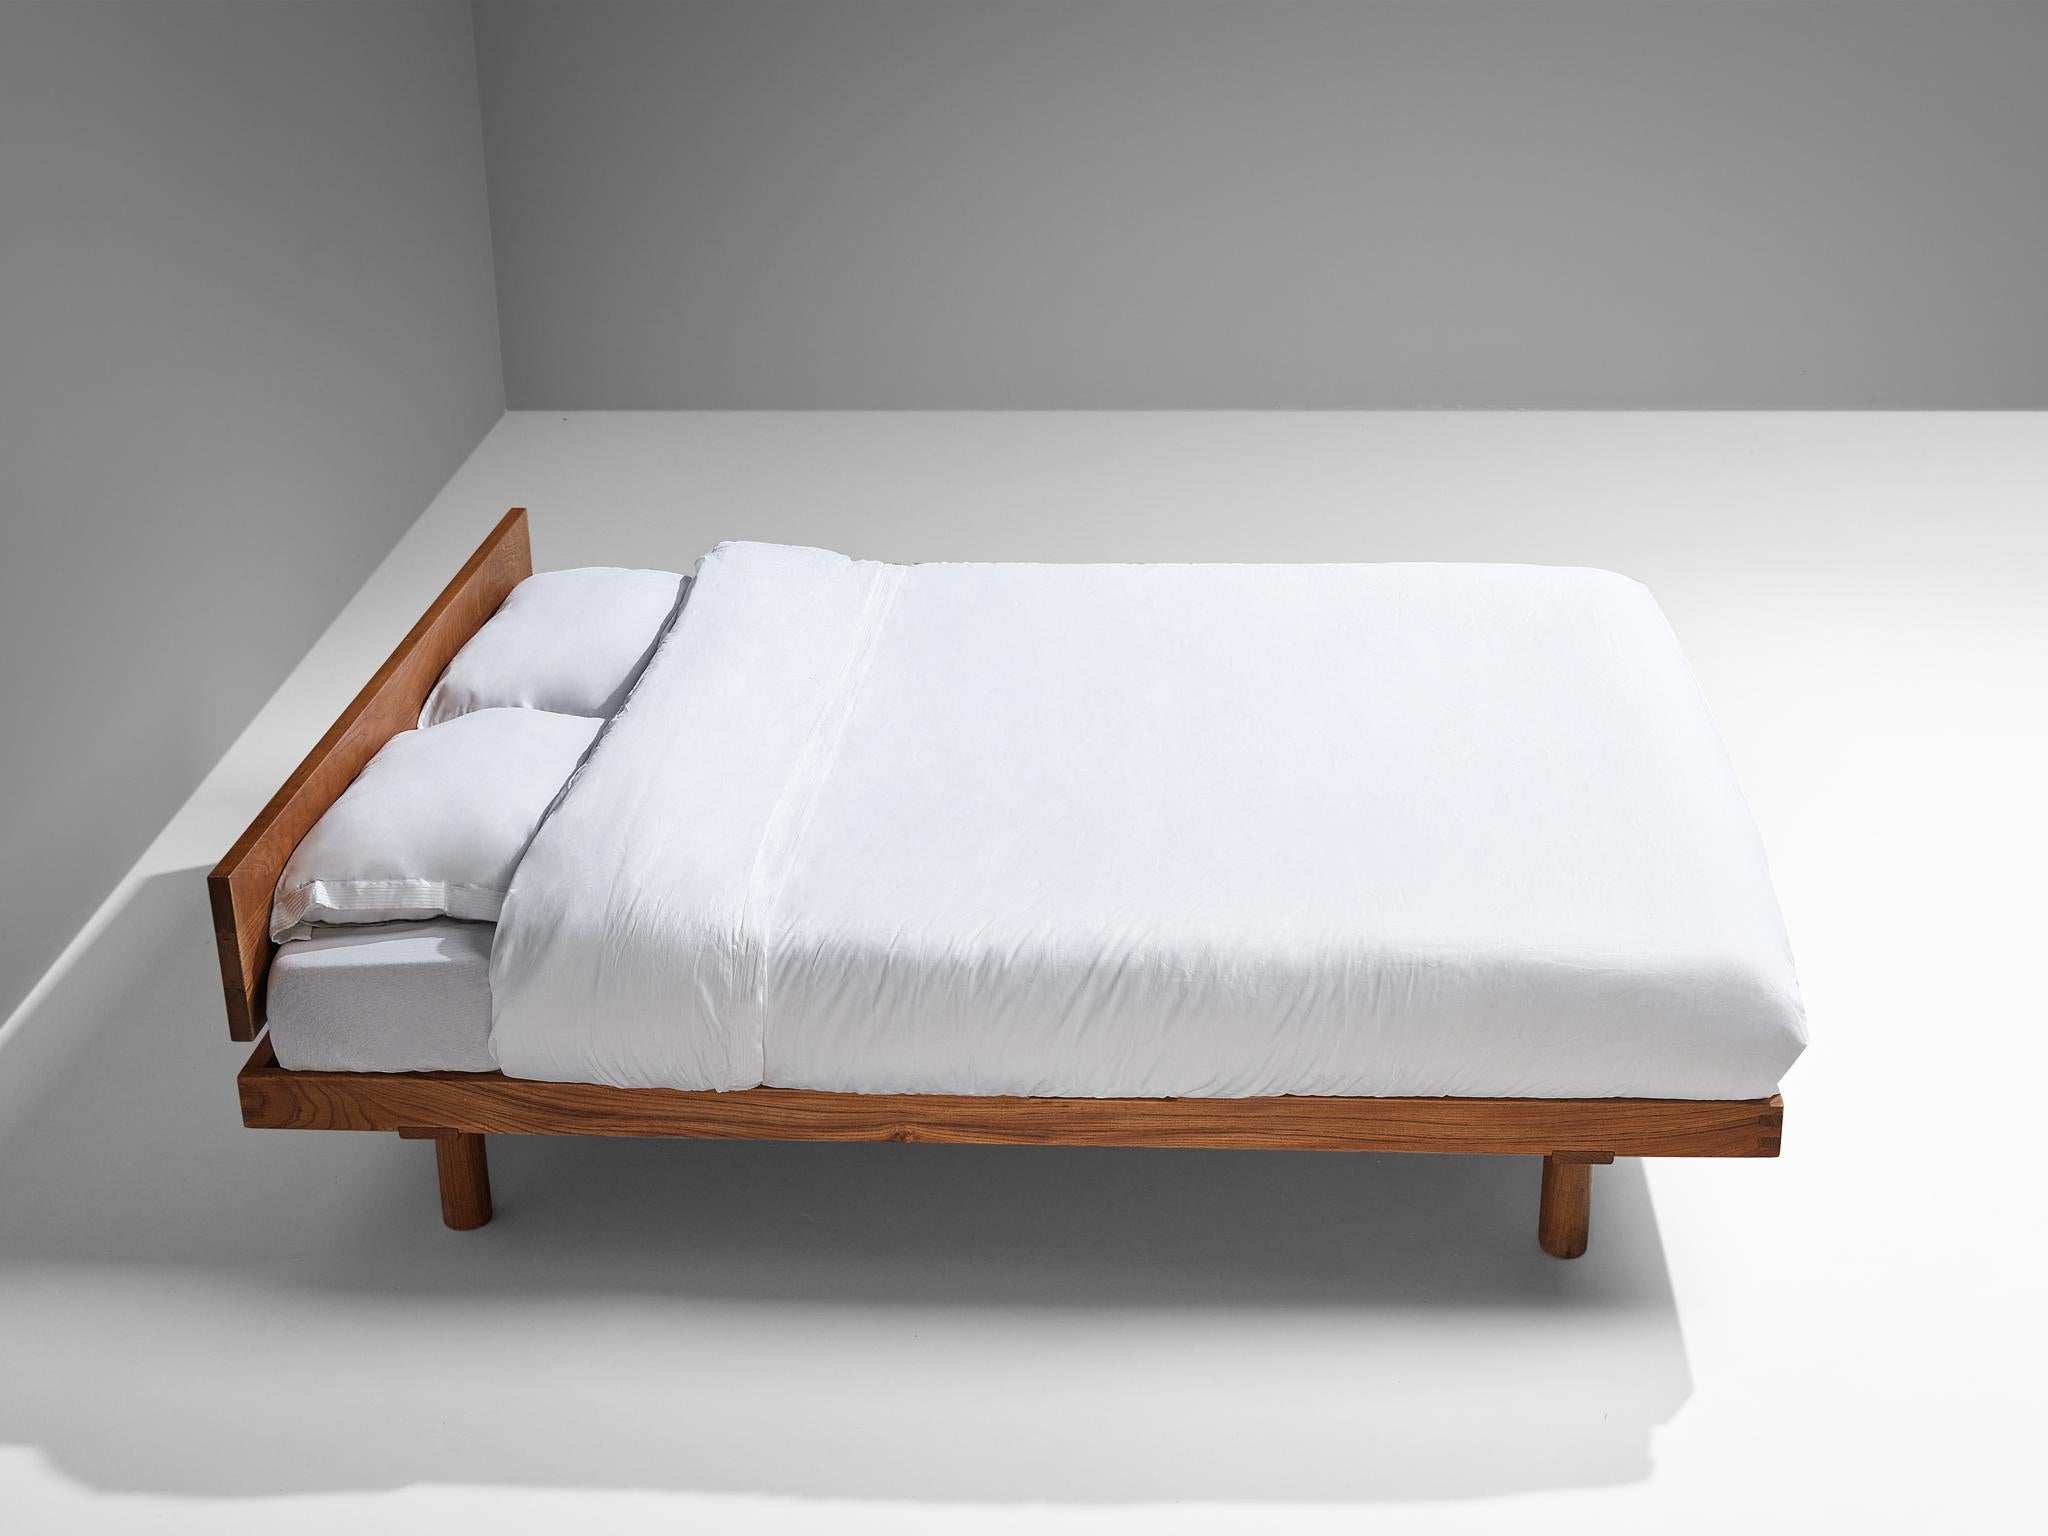 Pierre Chapo, 'Godot' king bed or daybed, model 'L01L', elm, France, design 1959.

This design is an early edition, created according to the original craft methodology of Pierre Chapo. The L01 bed by Pierre Chapo is characterized for its taut, sober